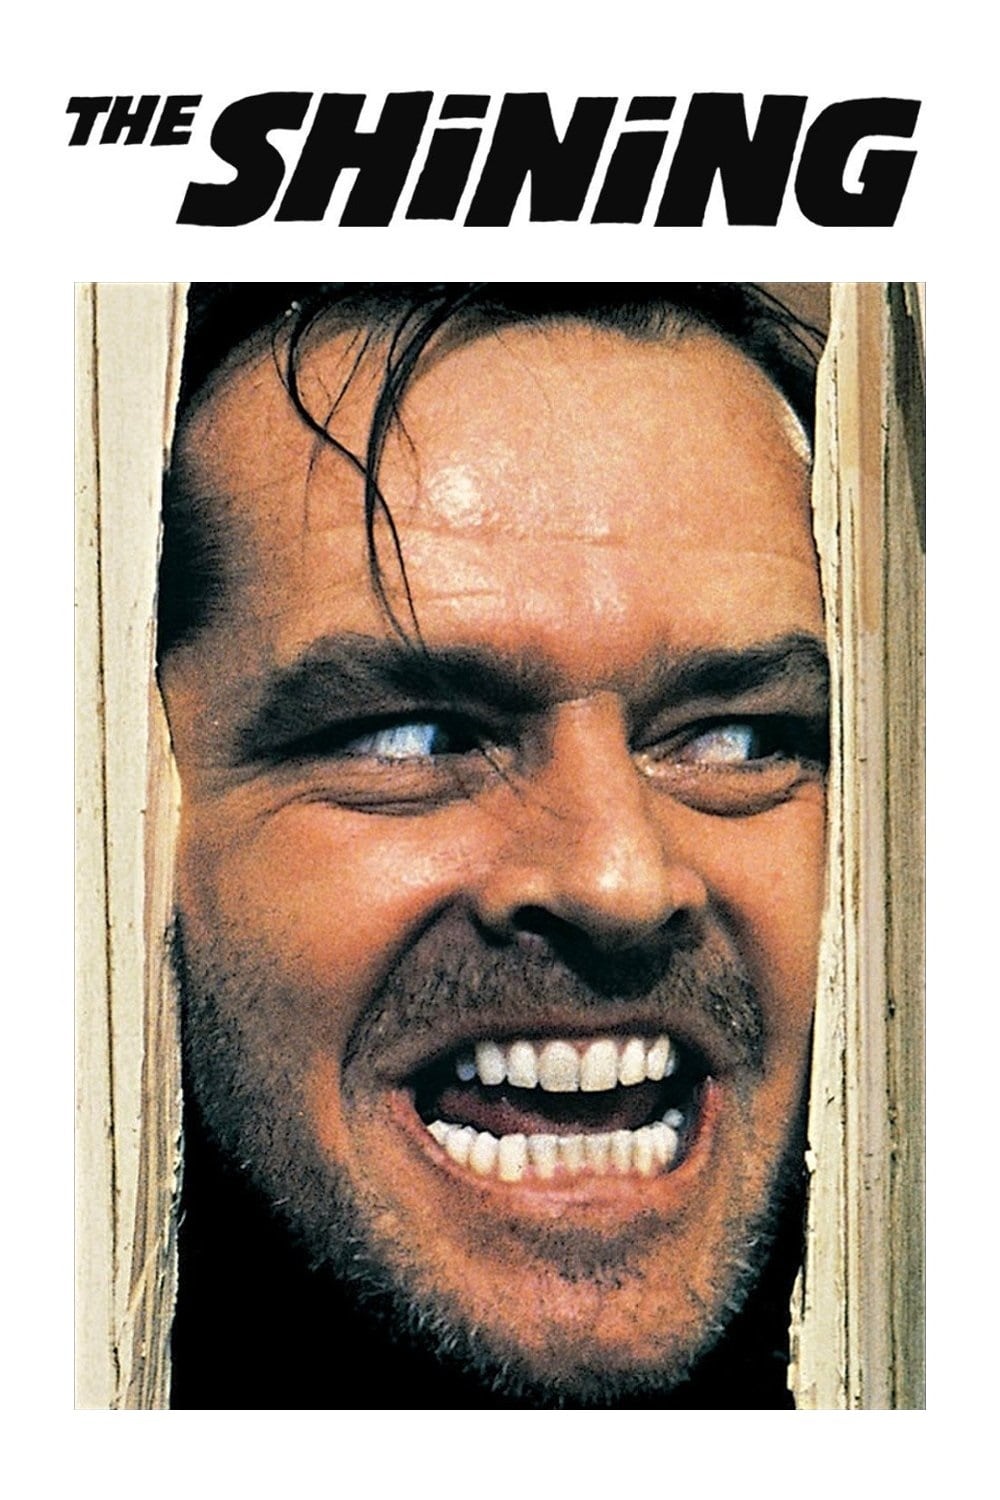 The Shining (The Shining, #1) by Stephen King